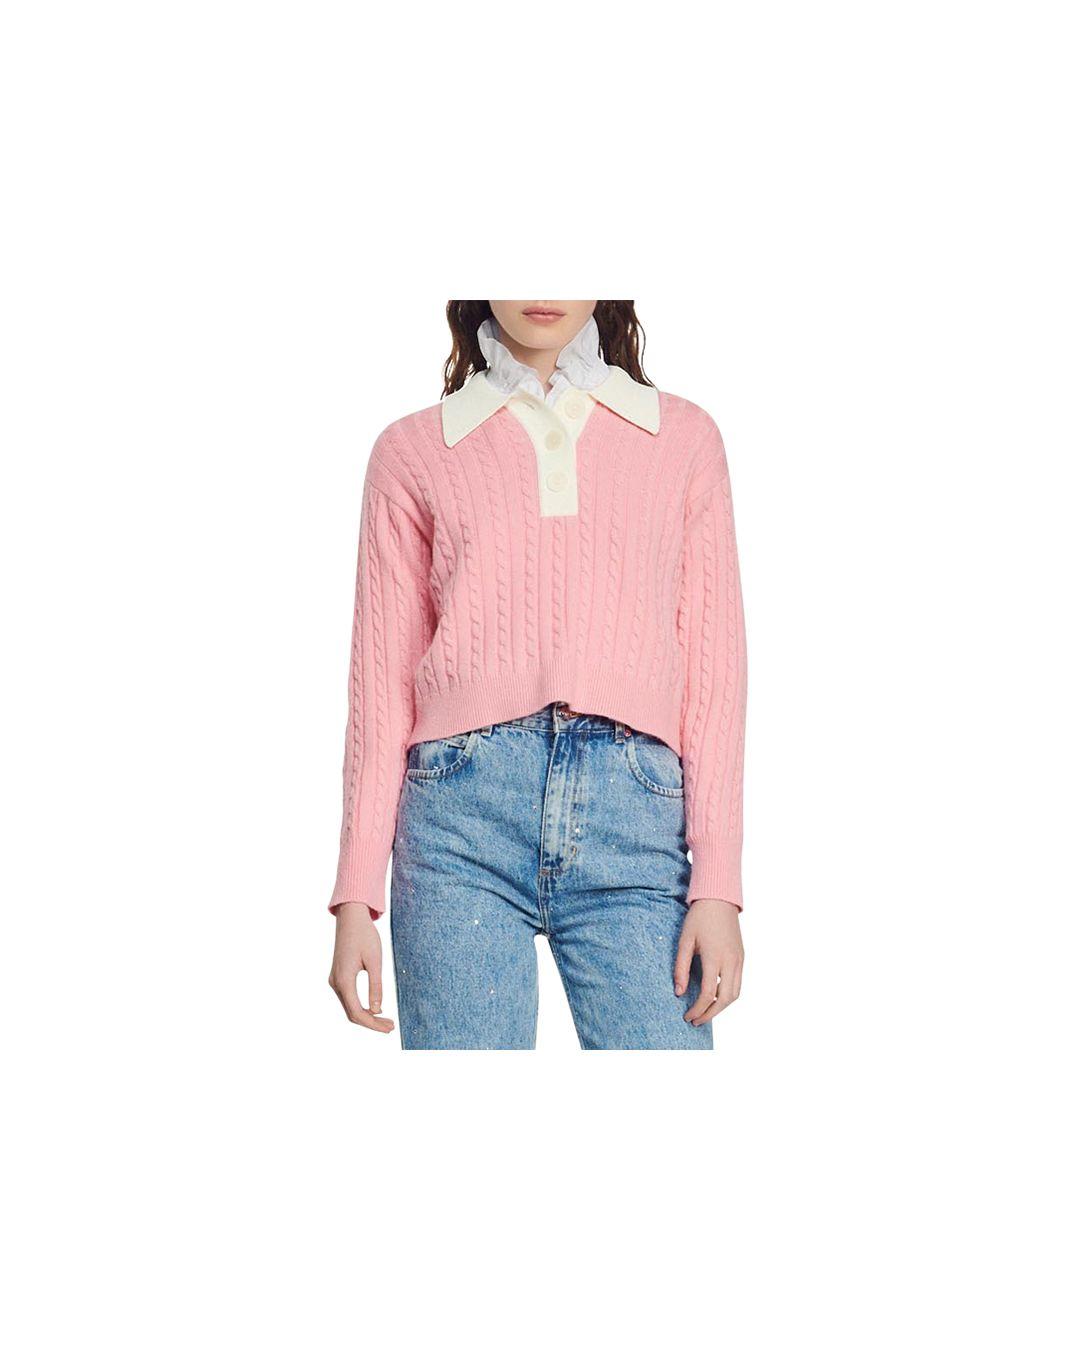 Sandro Reno Contrast Collar Sweater in Pink | Lyst